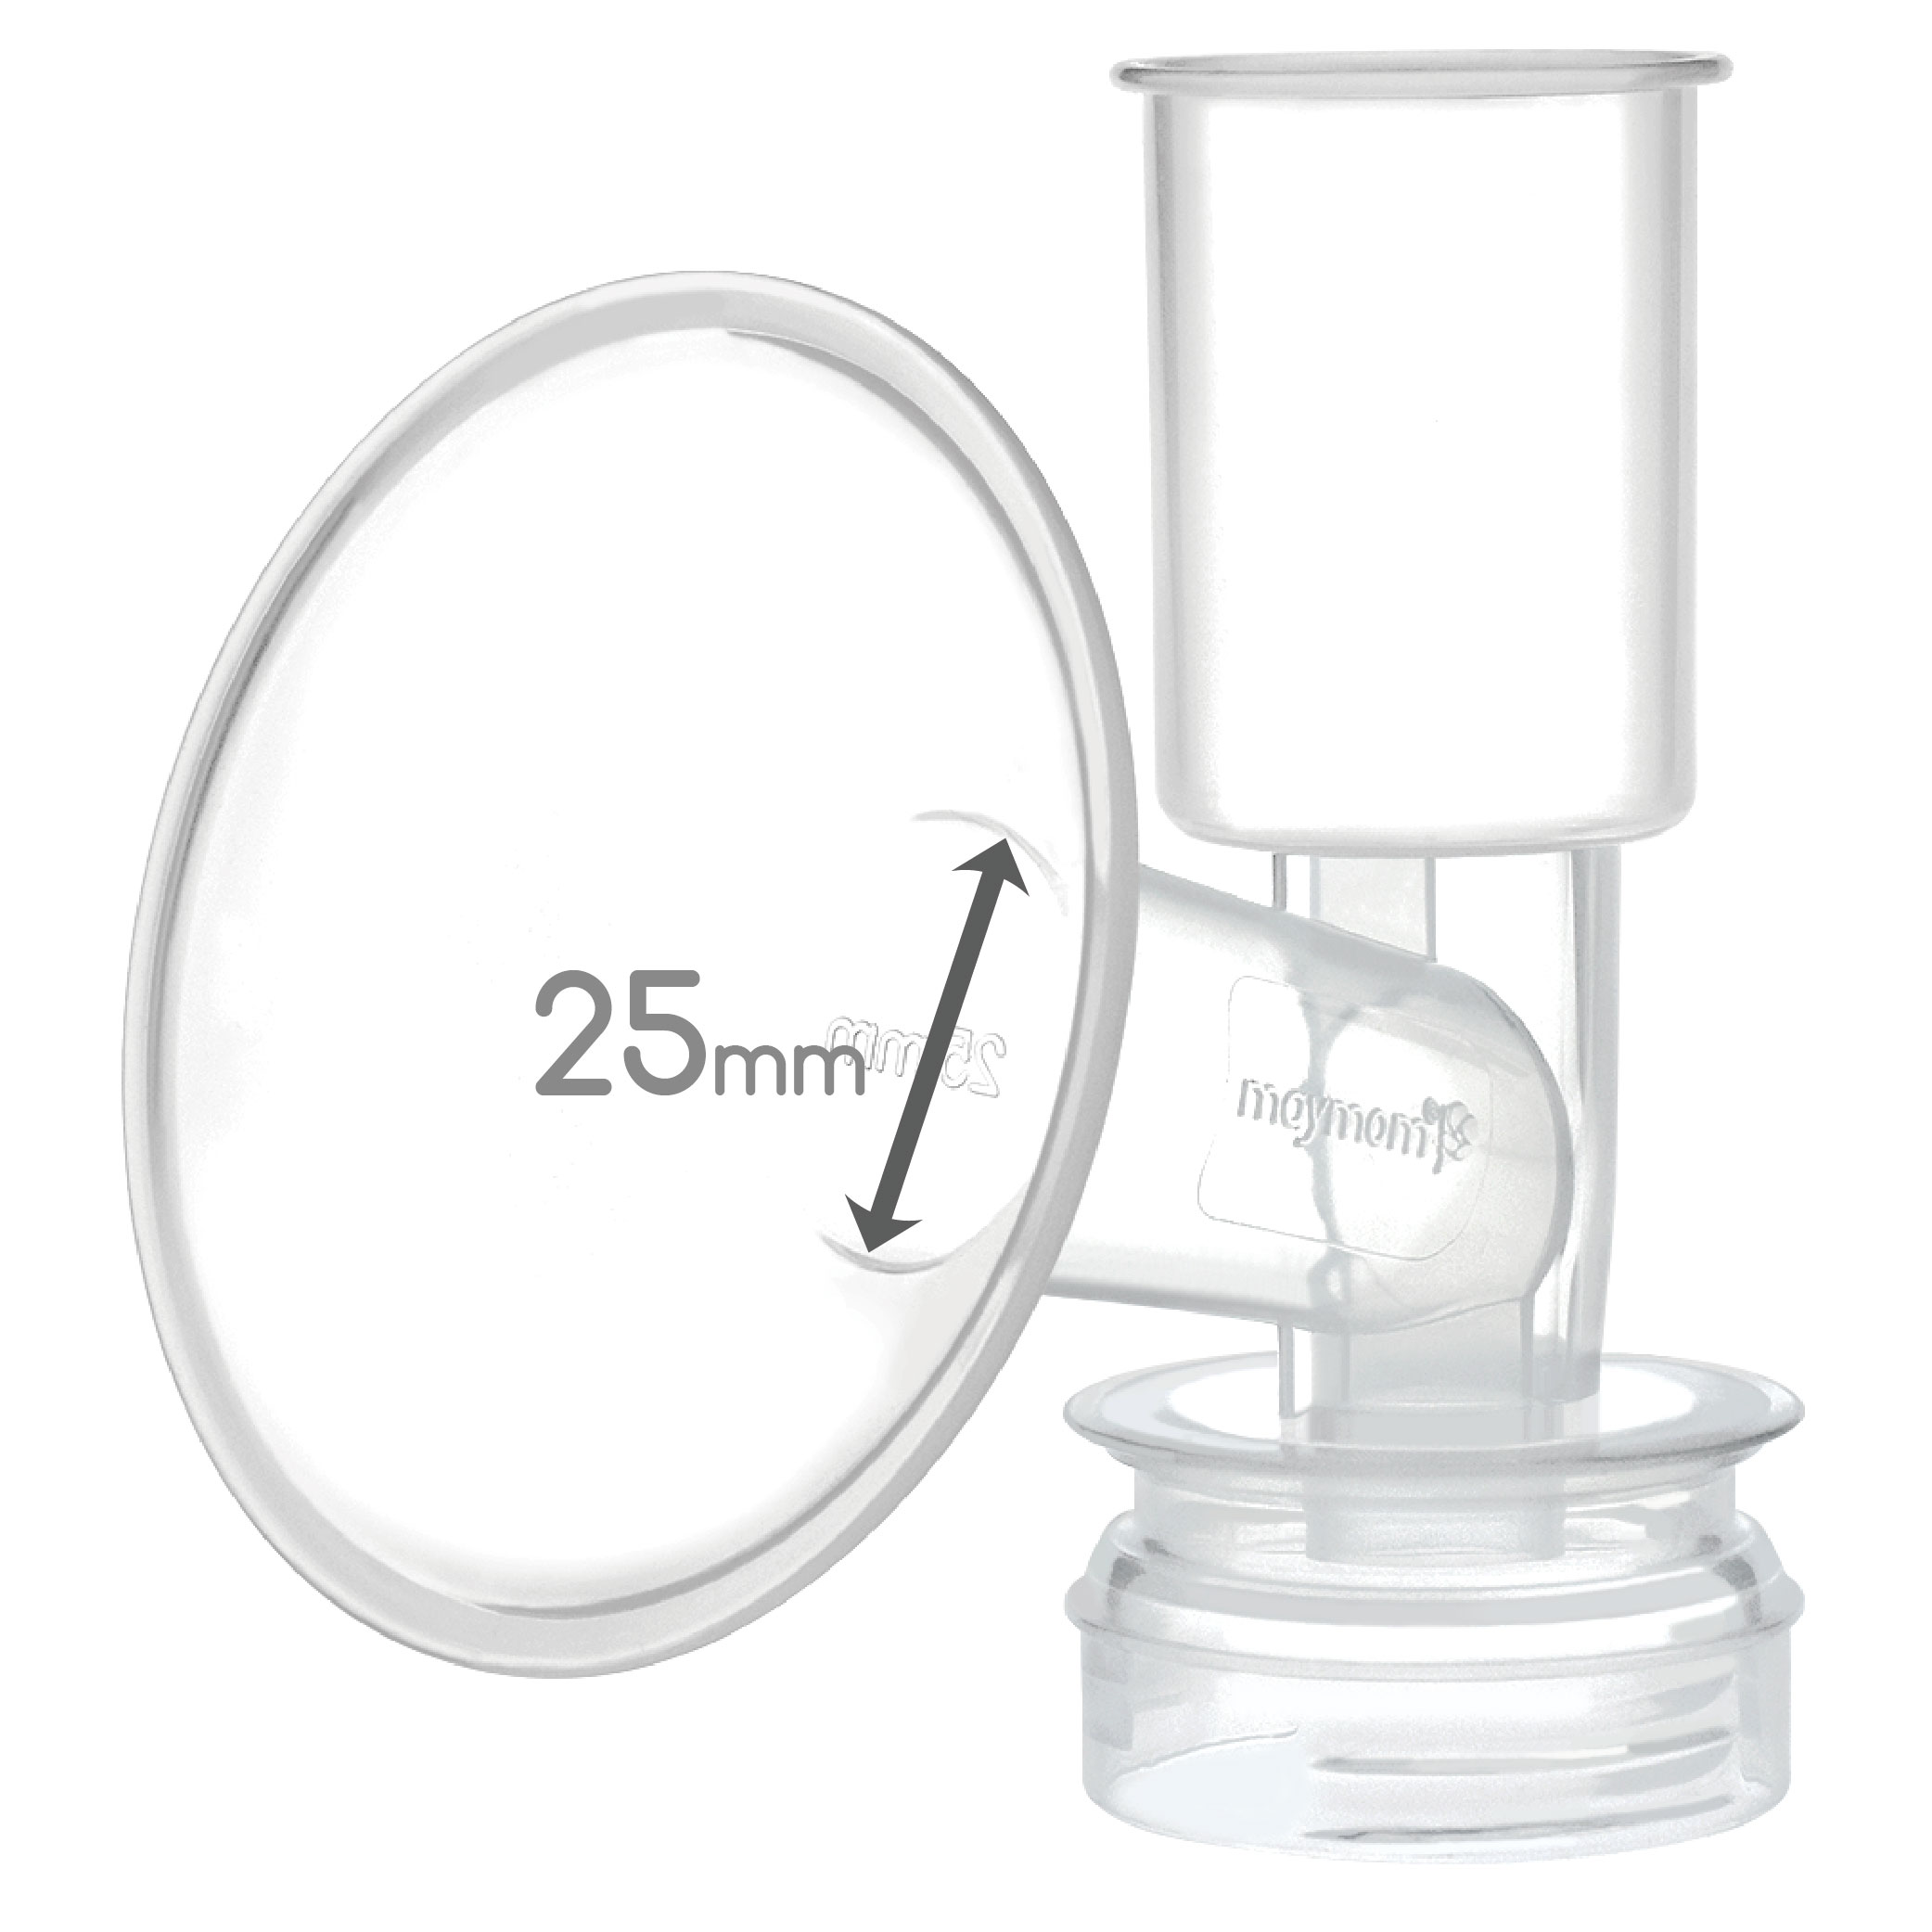 Maymom Breast Shield Flange Compatible with Ameda Breast Pumps (25 mm, 1-Piece)